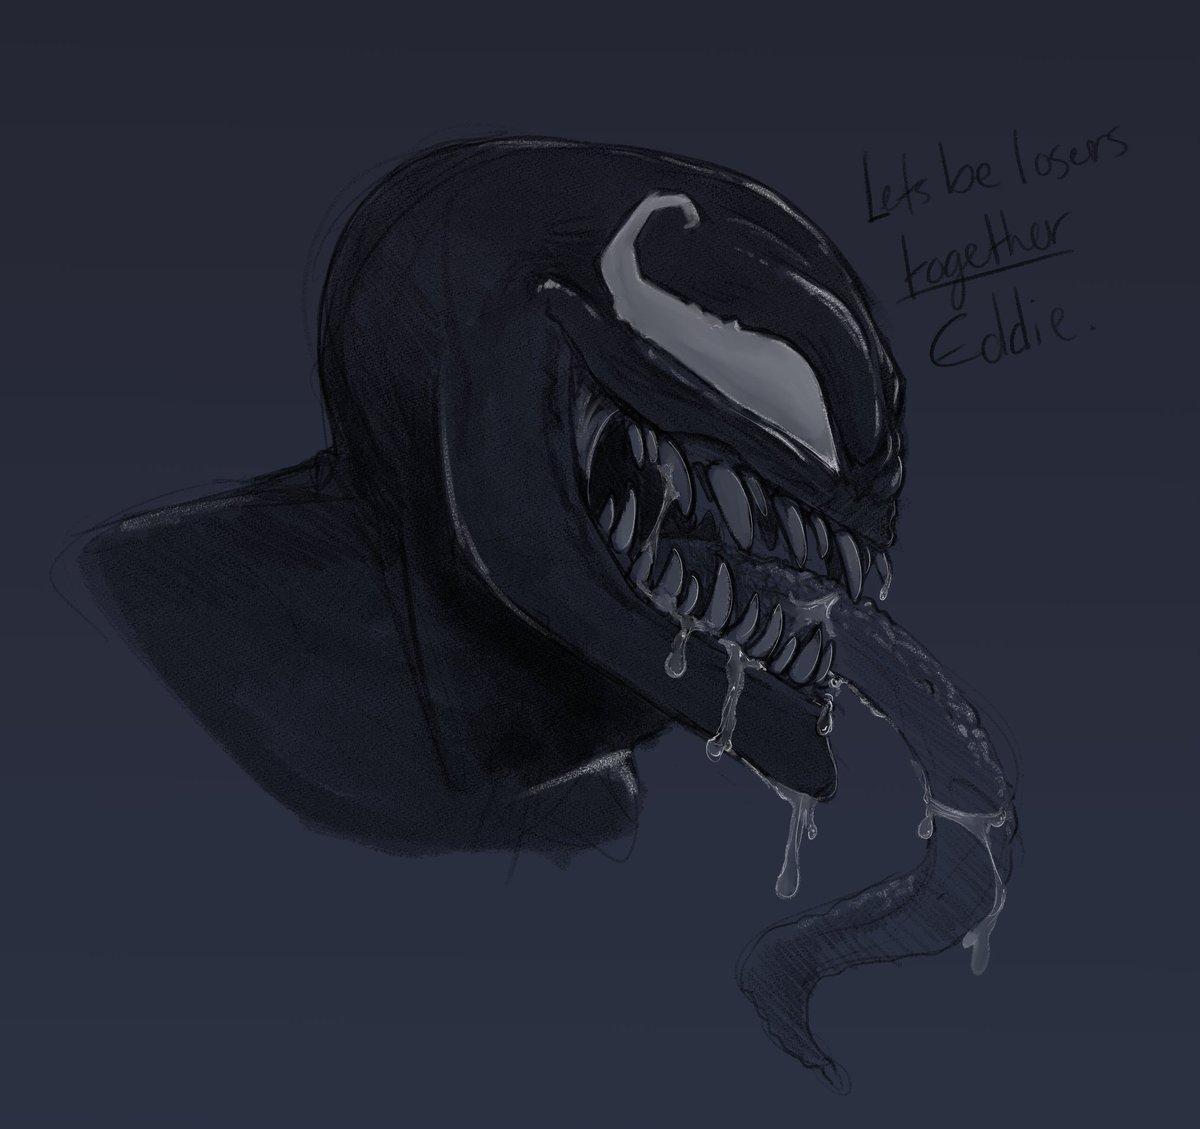 Getting excited for #SpiderMan2 and drew the ever so lovely, Venom.